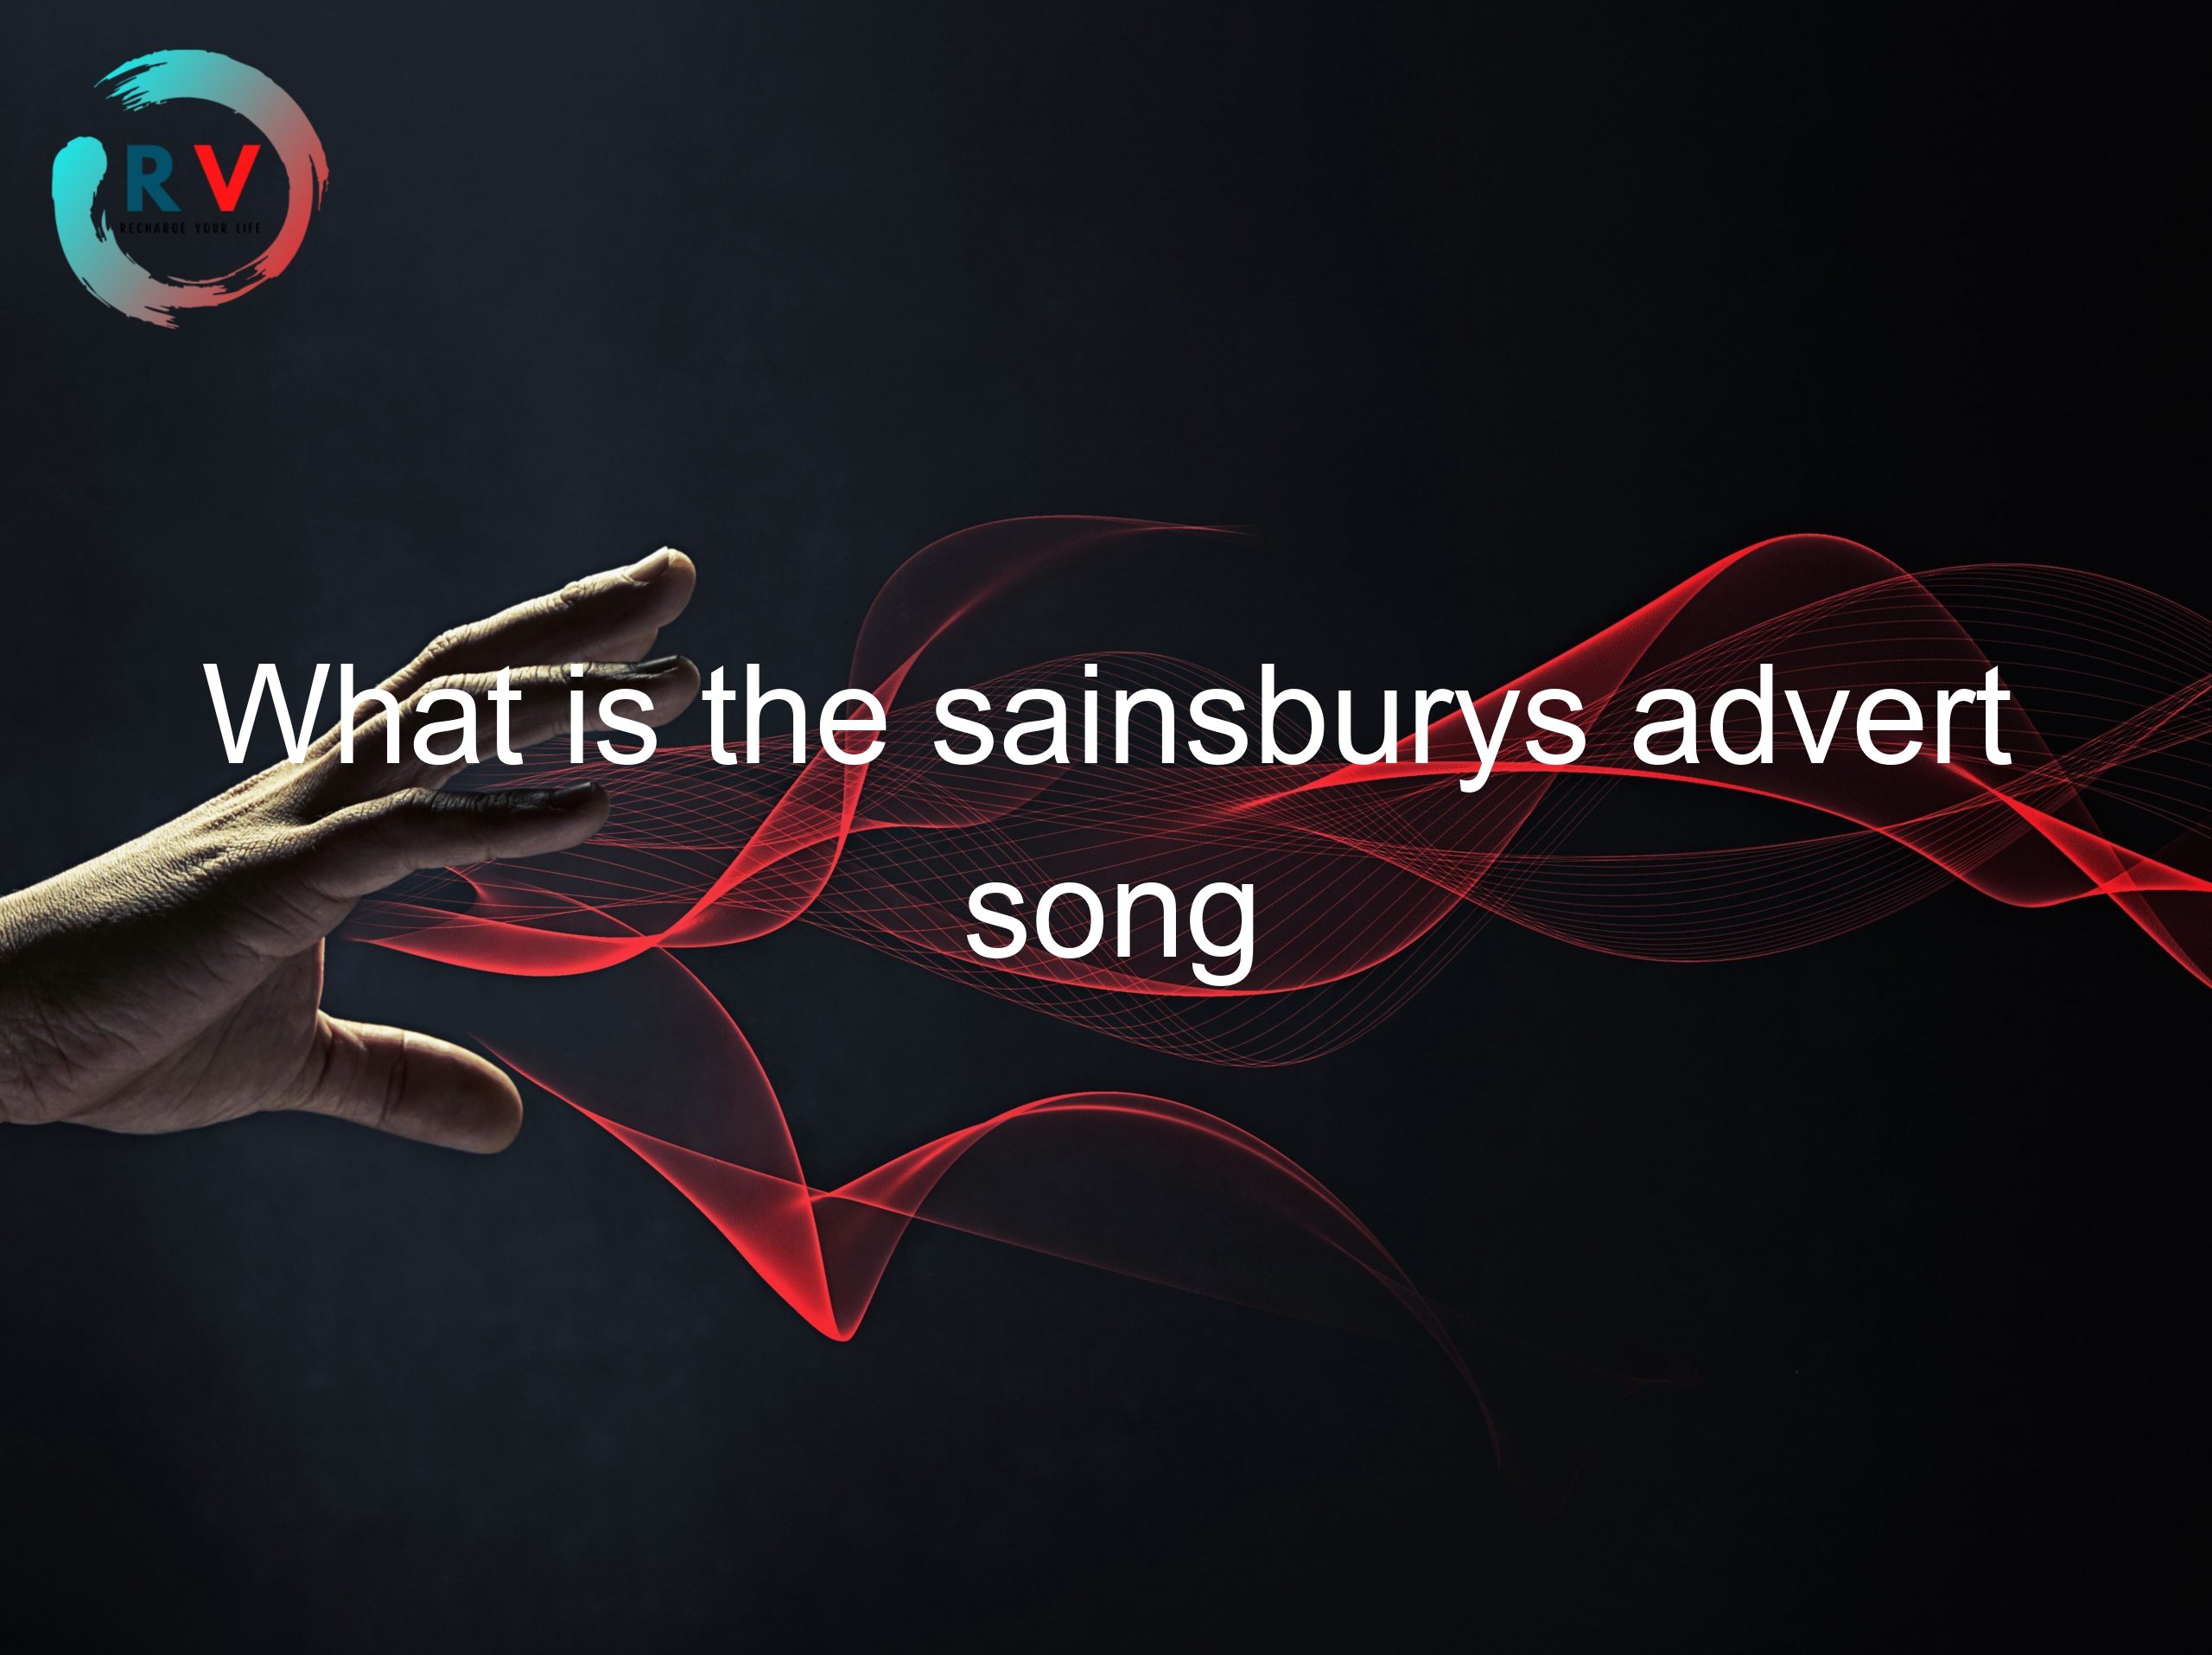 What is the sainsburys advert song